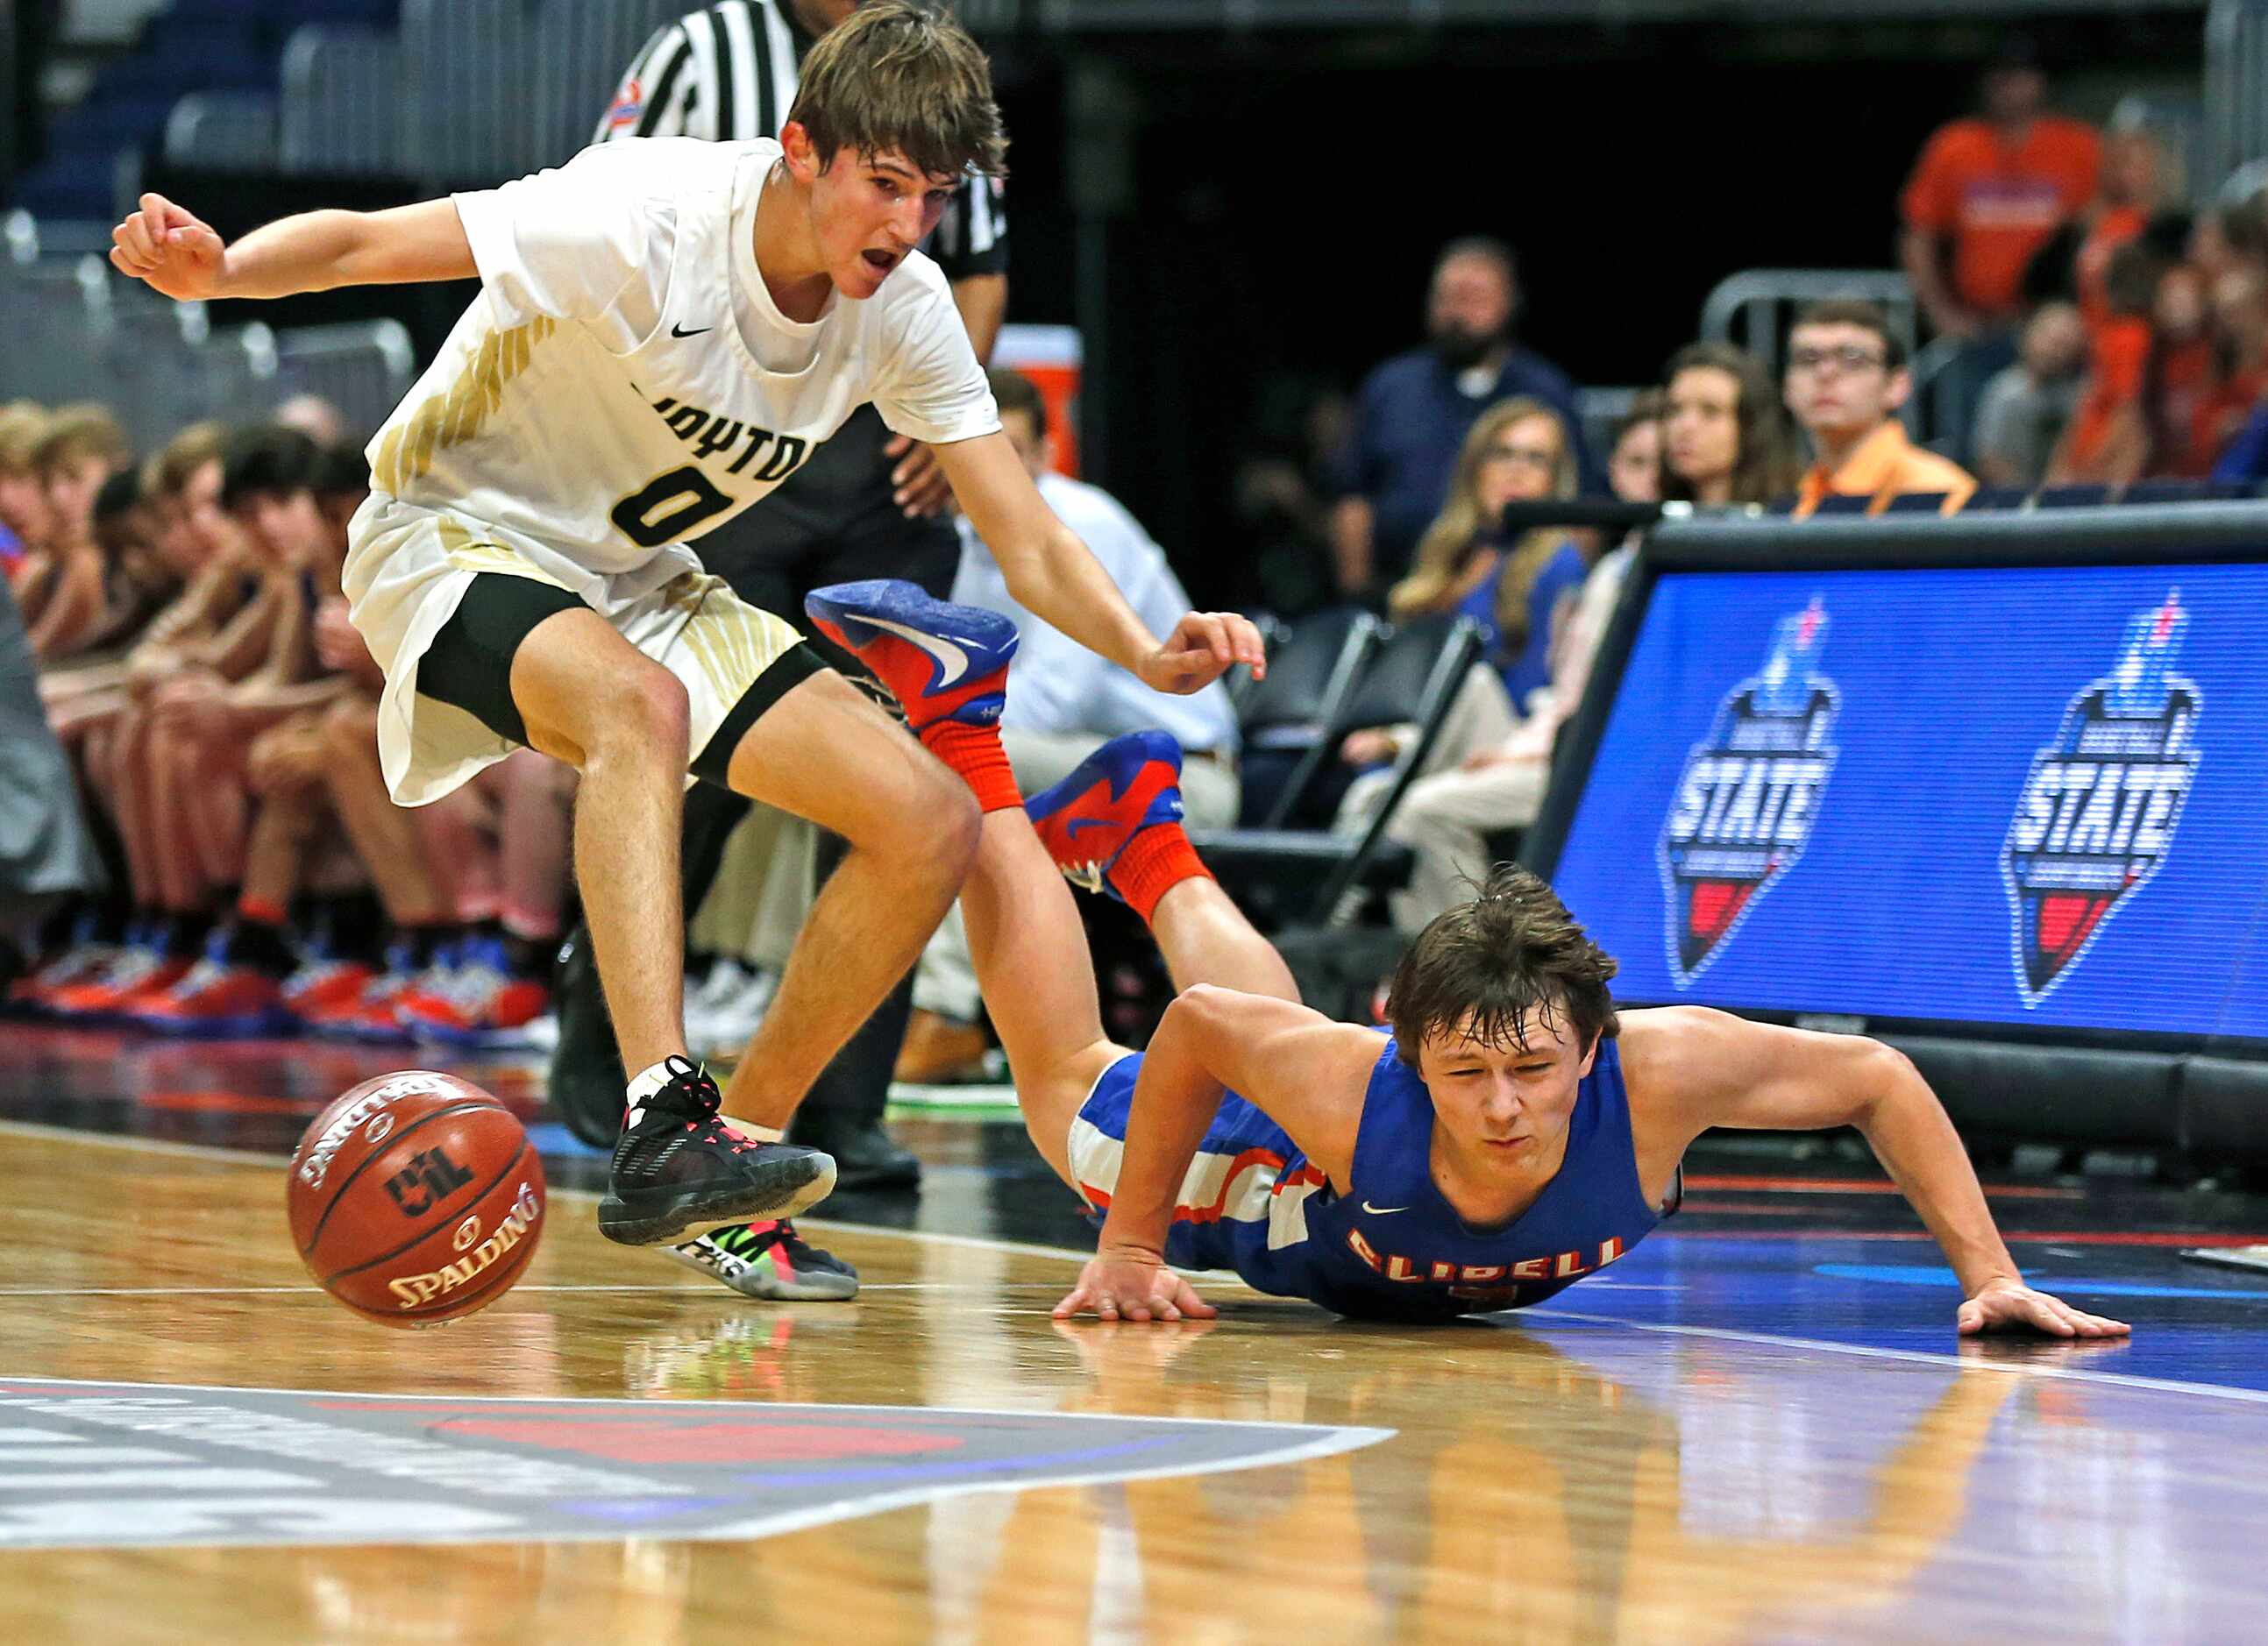 Slidell guard Brock Harwell #3 hits the court on an attempted steal. Slidell defeated Jayton...